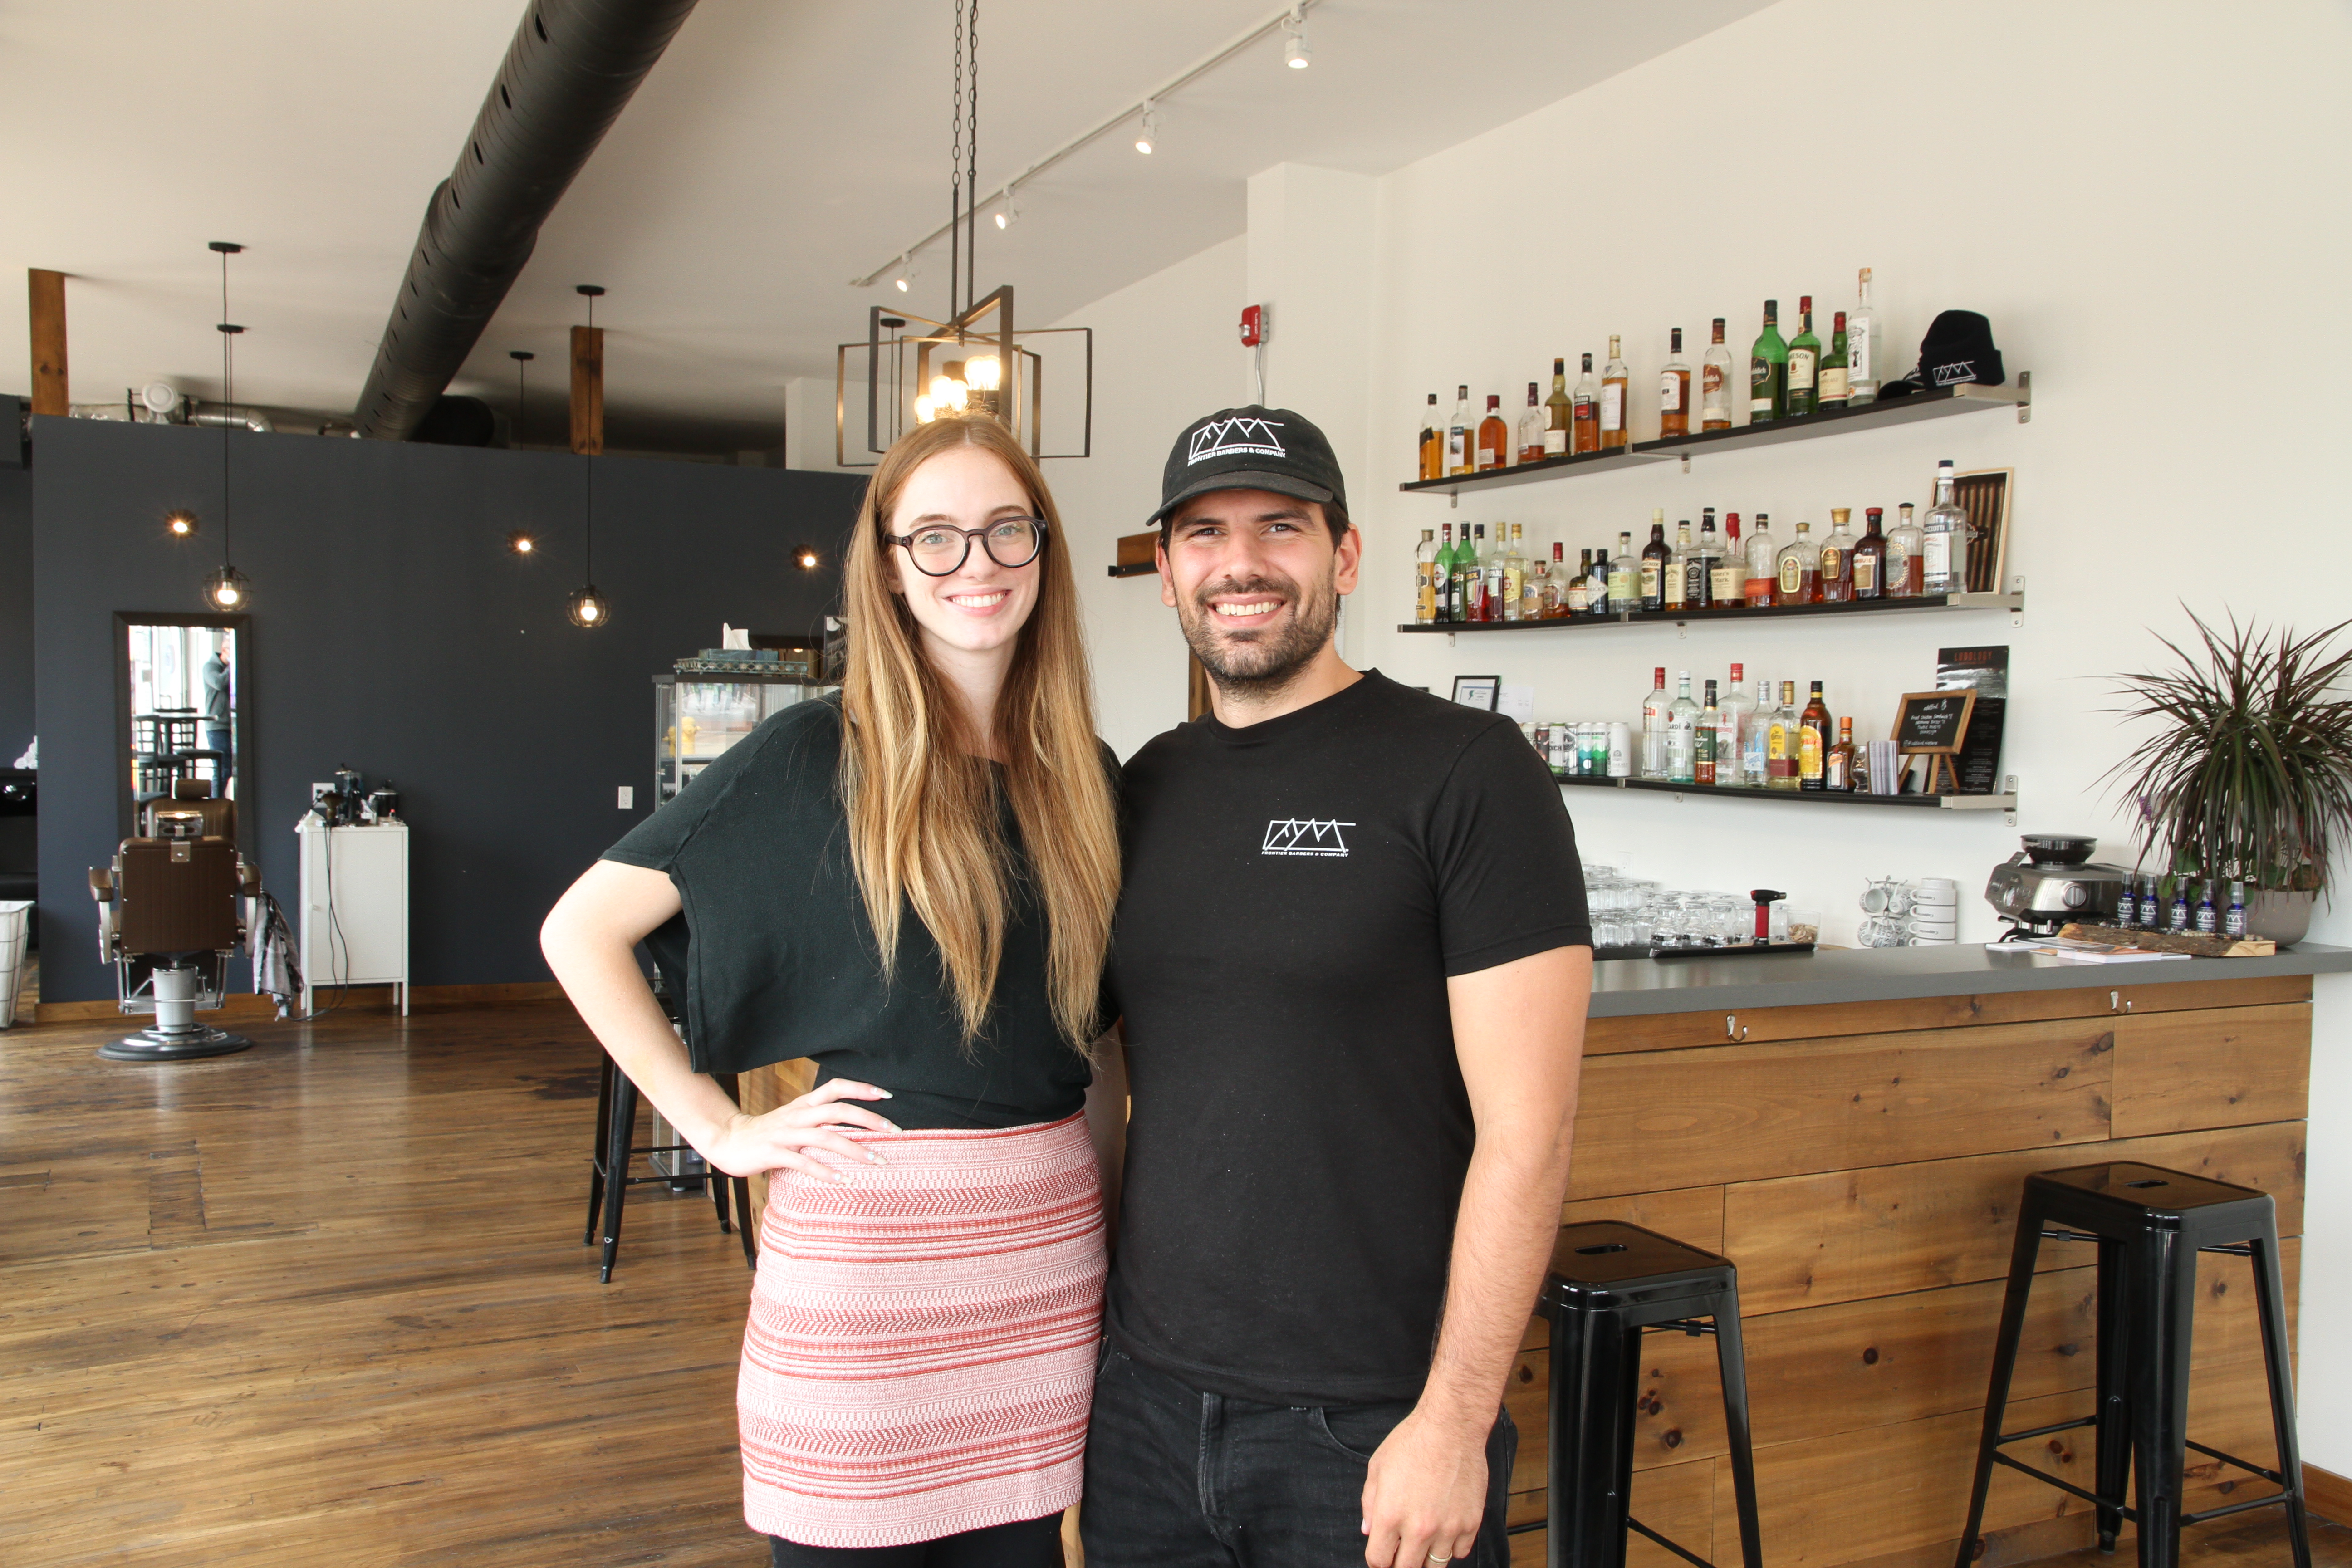 Matthew Bodis and Brittney Dapice own Frontier Barbers and are past participants in the Starter Company Plus program.